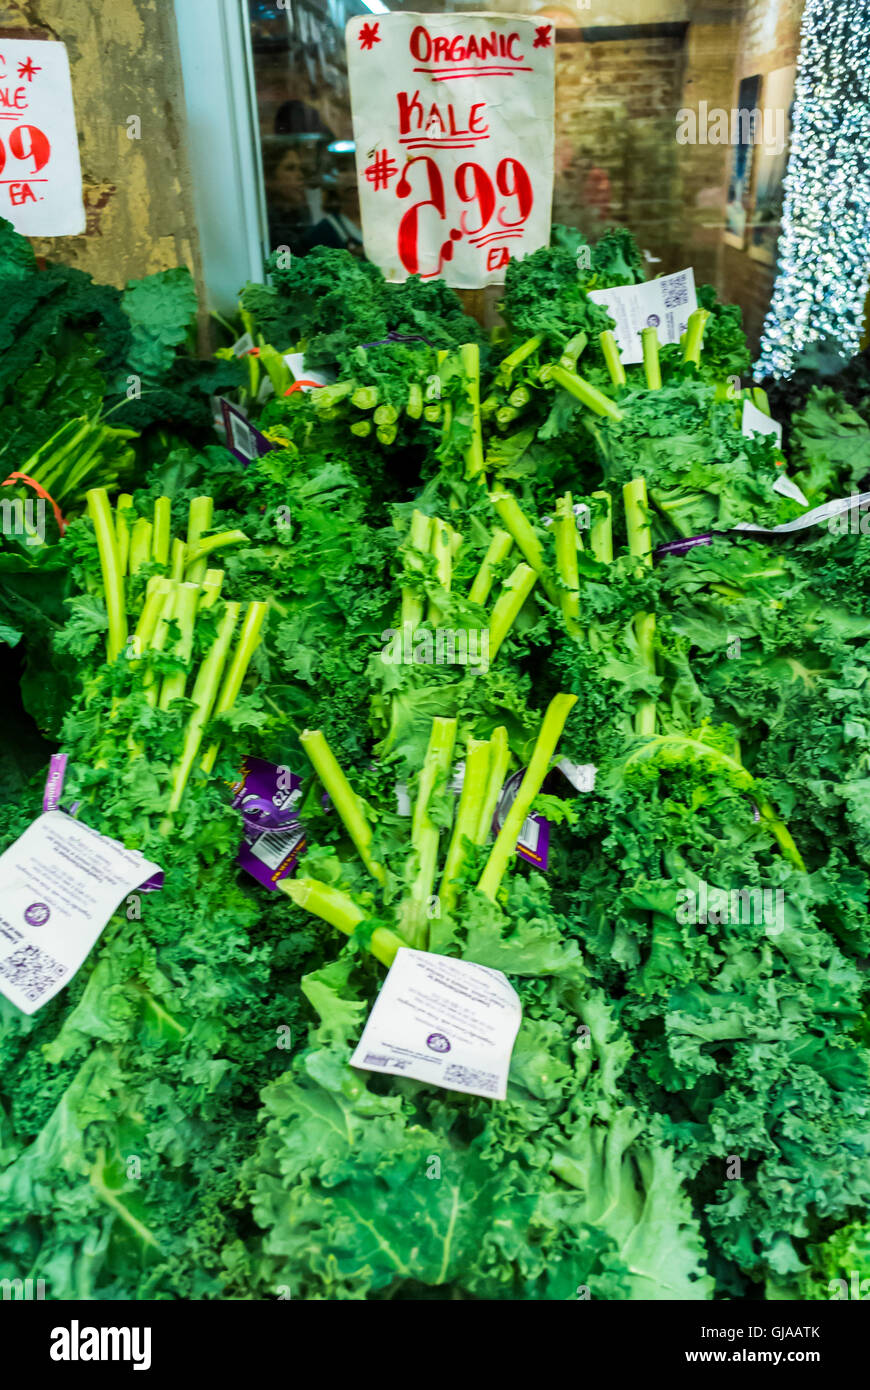 New York, NY, USA, Organic Foods neighborhood grocery store vegetables Fresh, Kale, on Display in CHelsea Market, Food Shopping Stock Photo